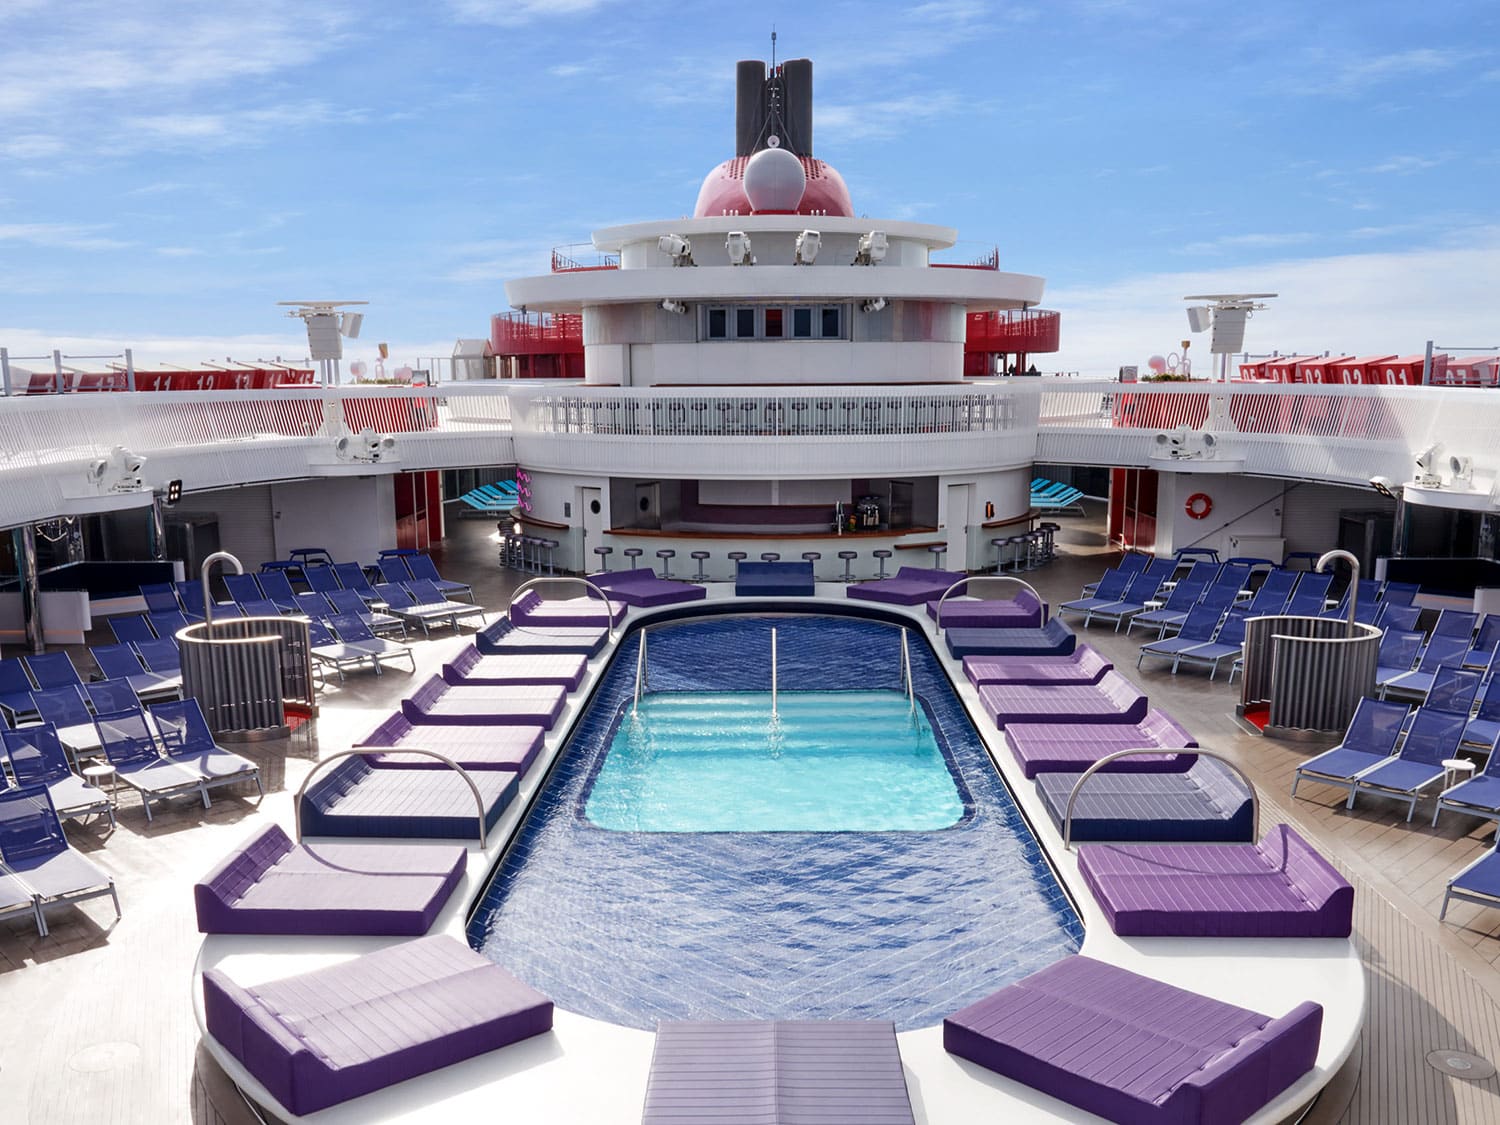 An aerial, empty view of one of the pools on the Virgin Voyages Valiant Lady.